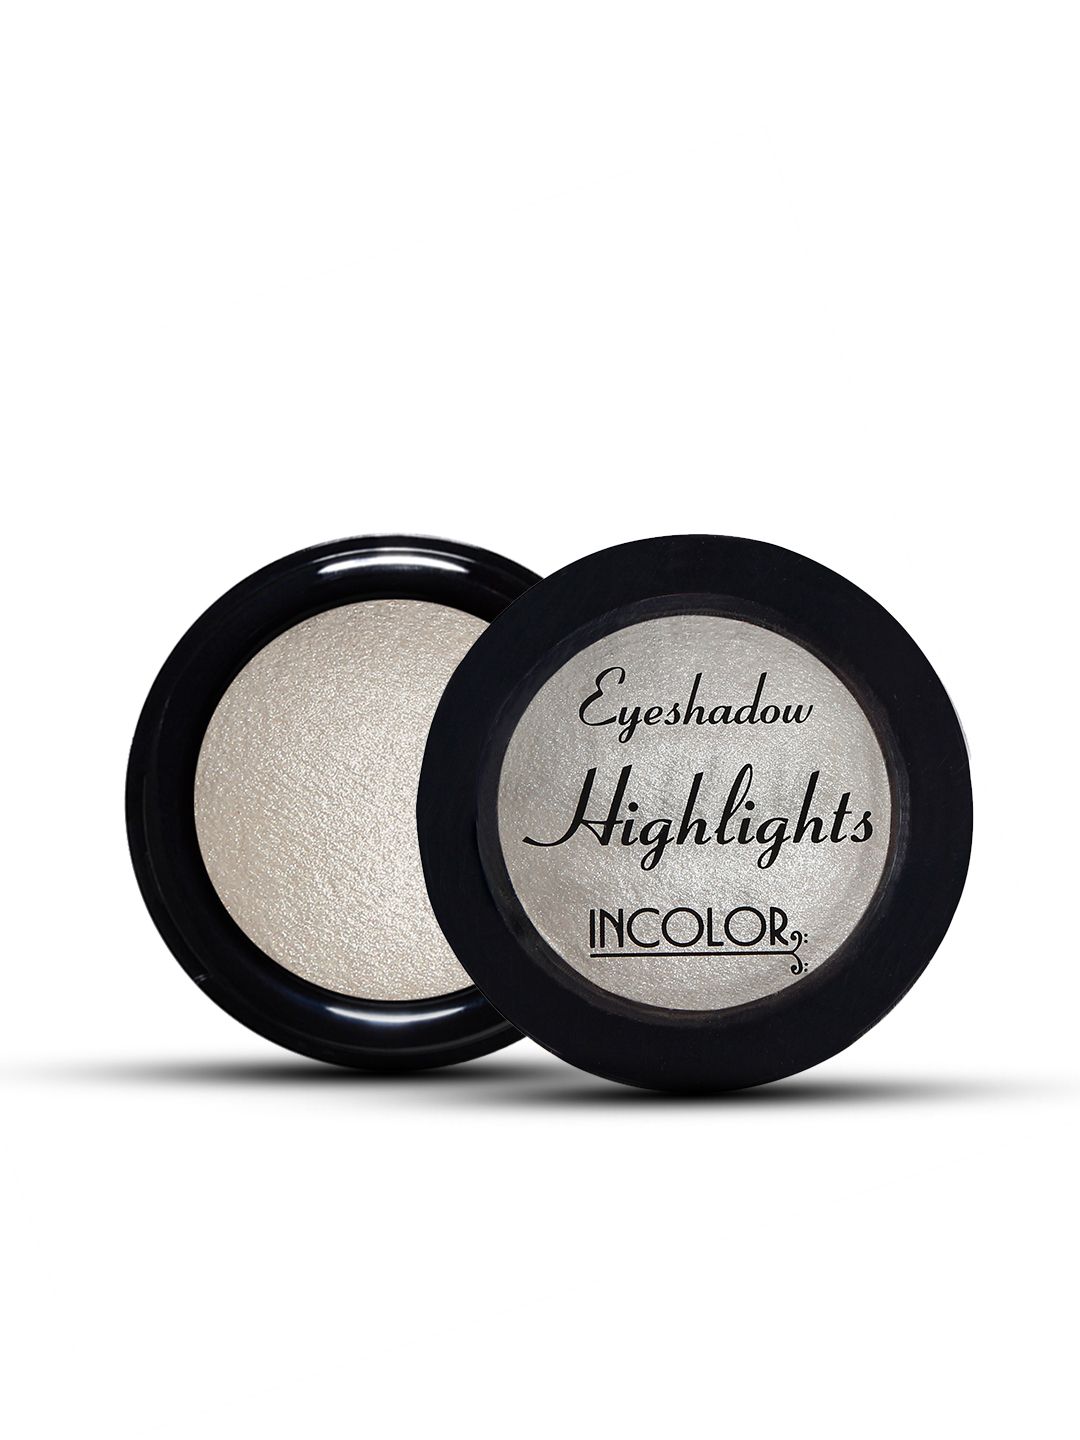 INCOLOR Grey Highlight Eyeshadow 02 4.5 gms Price in India